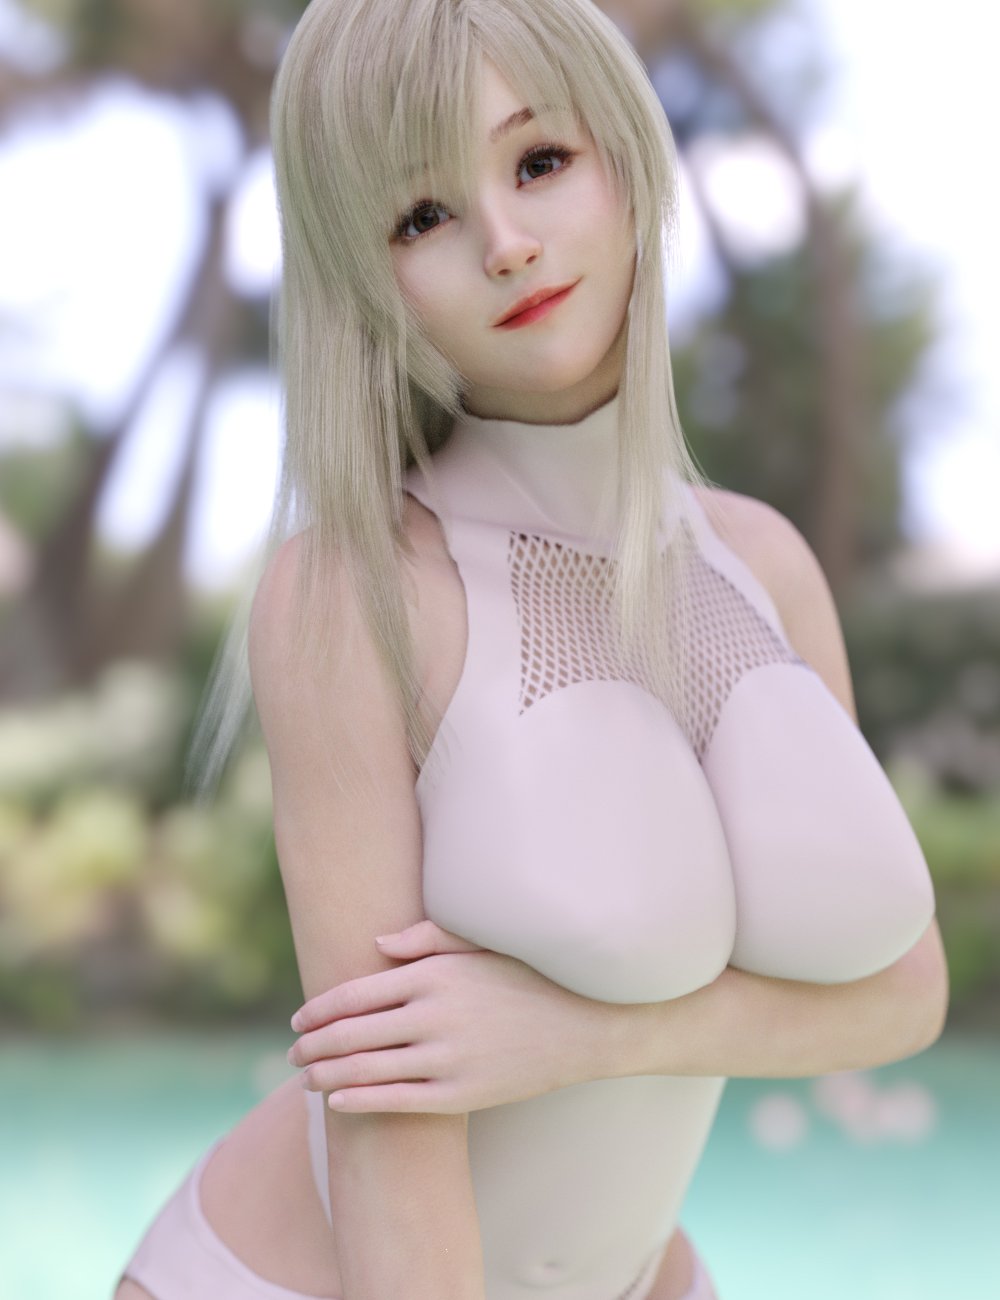 Hs Dforce Hip And Breast V2 For Genesis 3 8 And 81 Females Daz 3d 